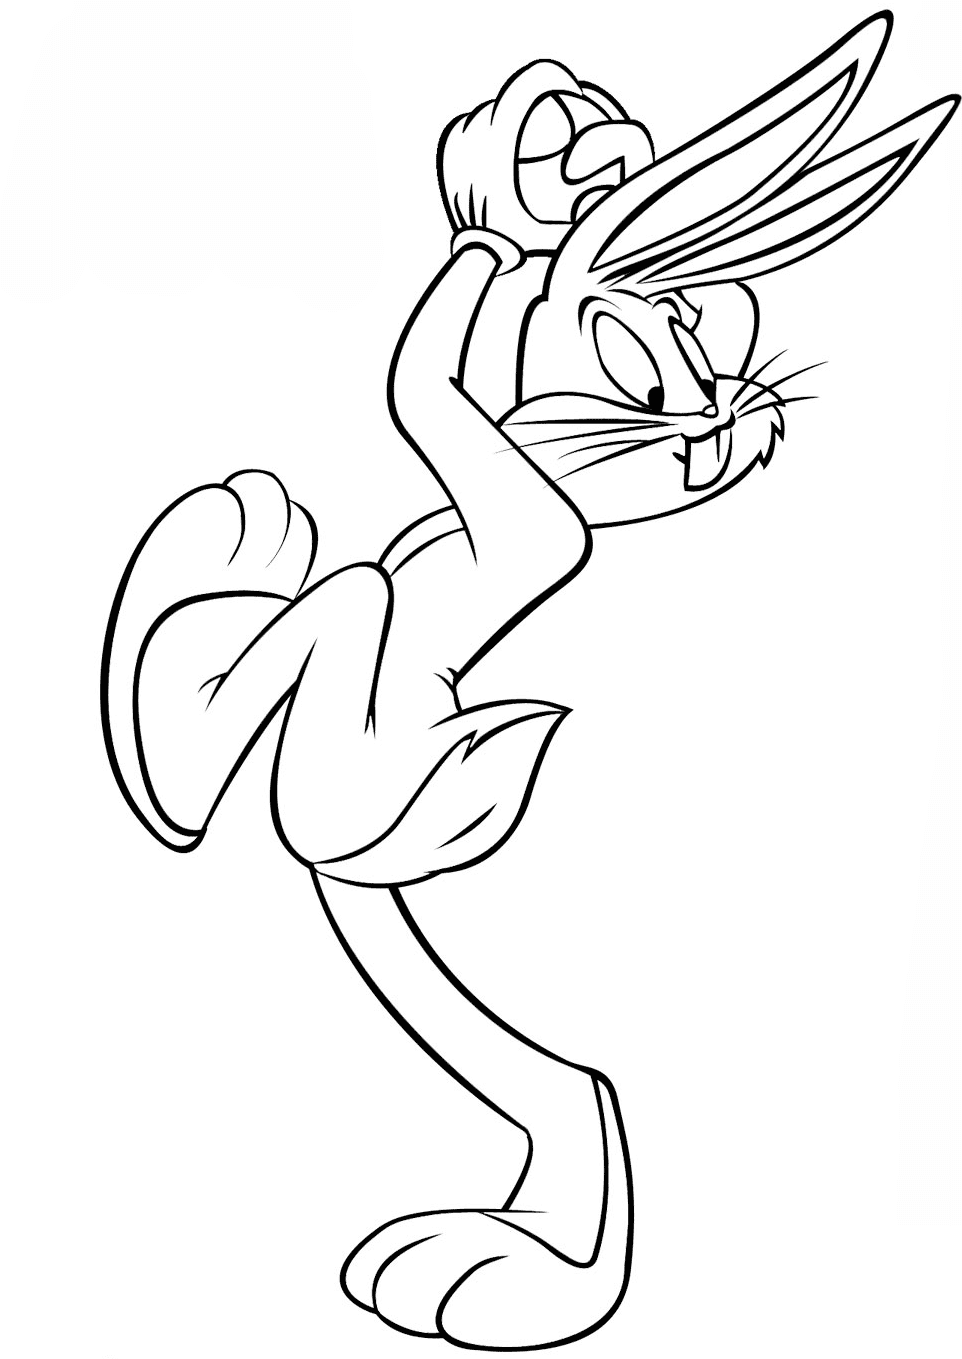 Bugs Bunny Playing Baseball Coloring Pages